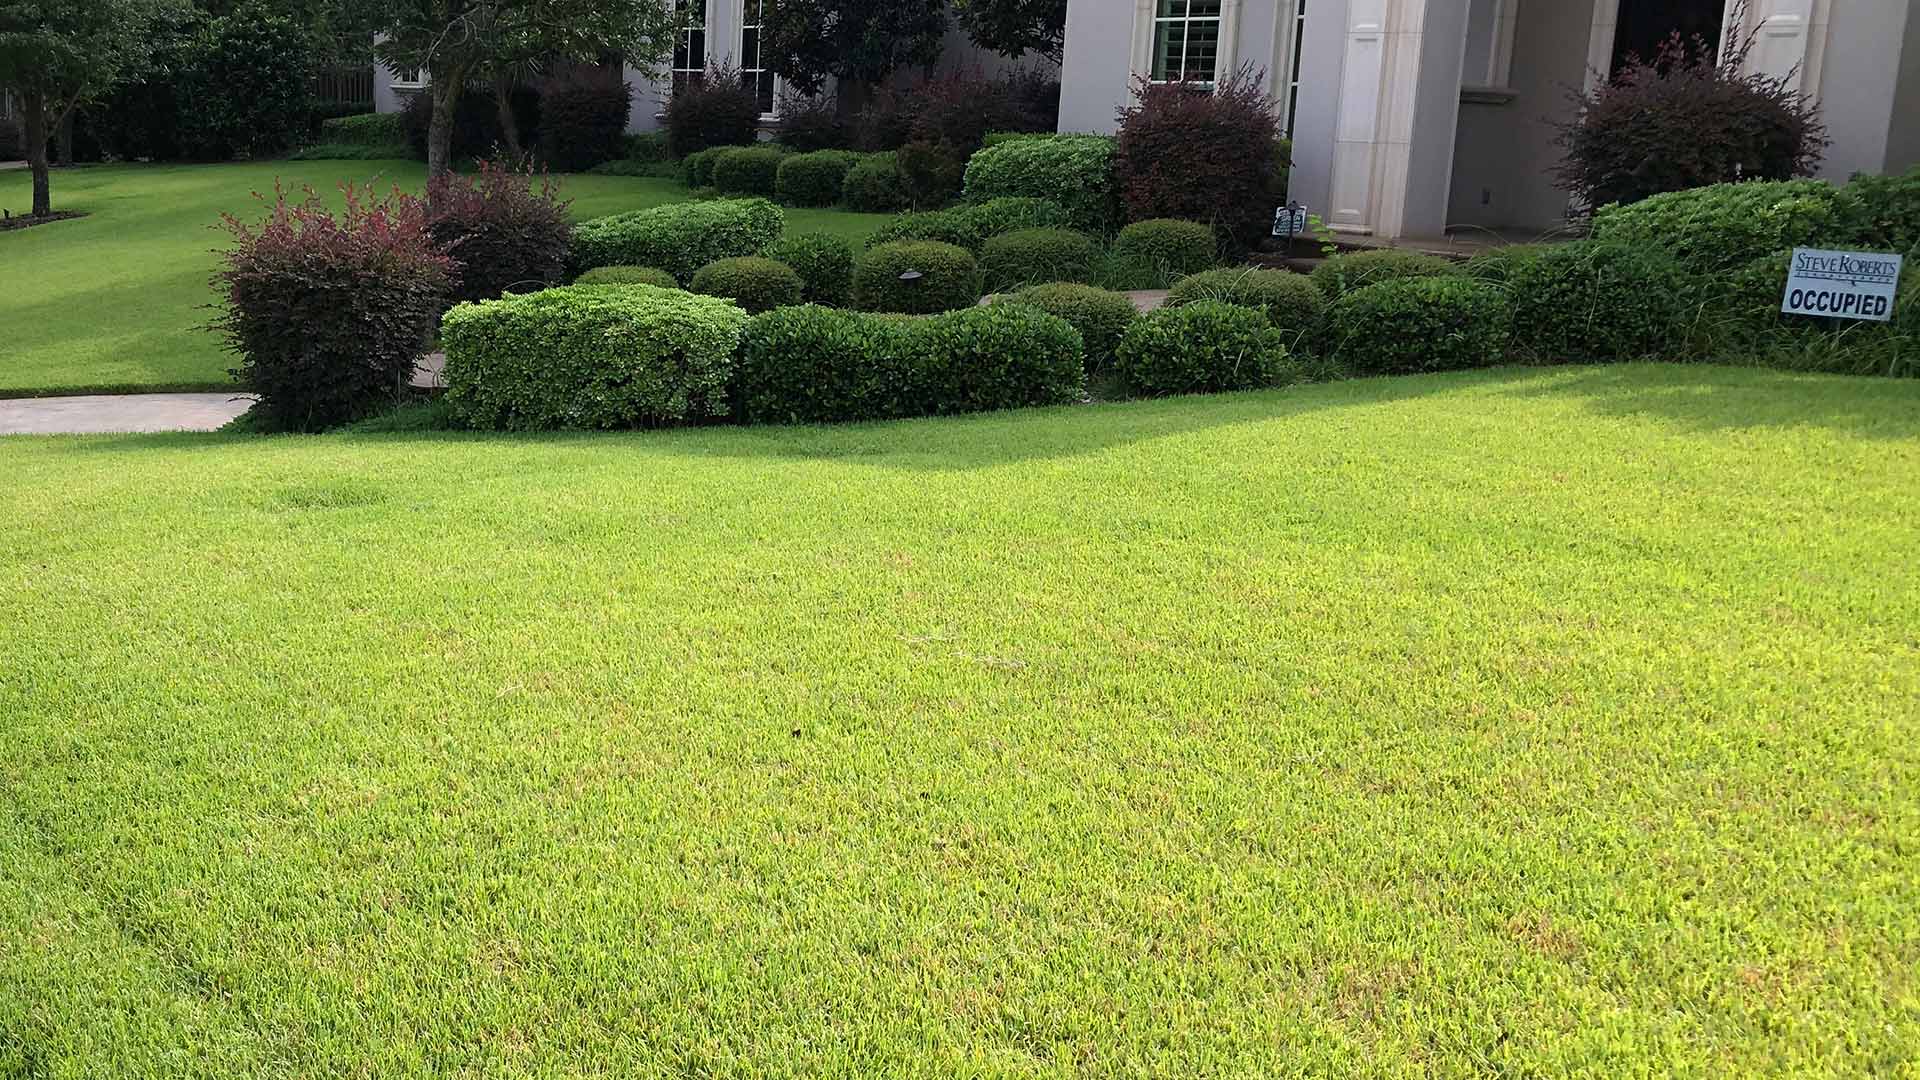 Beautiful lawn and trimmed landscape shrubs at a home in Murphy, TX.